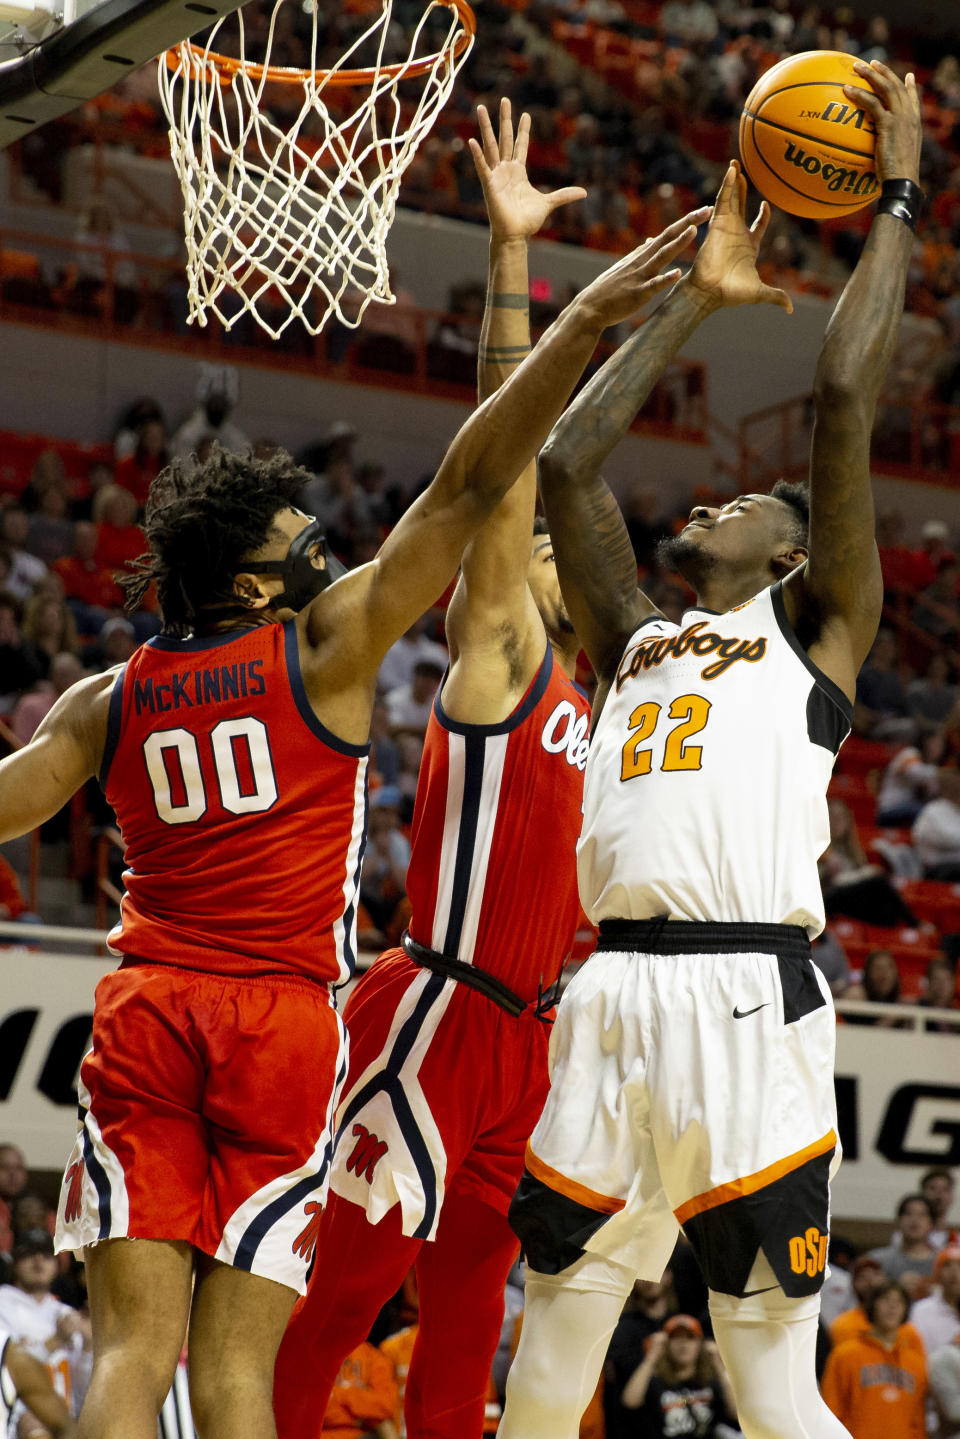 Mississippi's Jayveous McKinnis, left, and Myles Burns, center, guard against Oklahoma State's Kalib Boone (22) in the first half of an NCAA college basketball game in Stillwater, Okla., Saturday, Jan. 28, 2023. (AP Photo/Mitch Alcala)